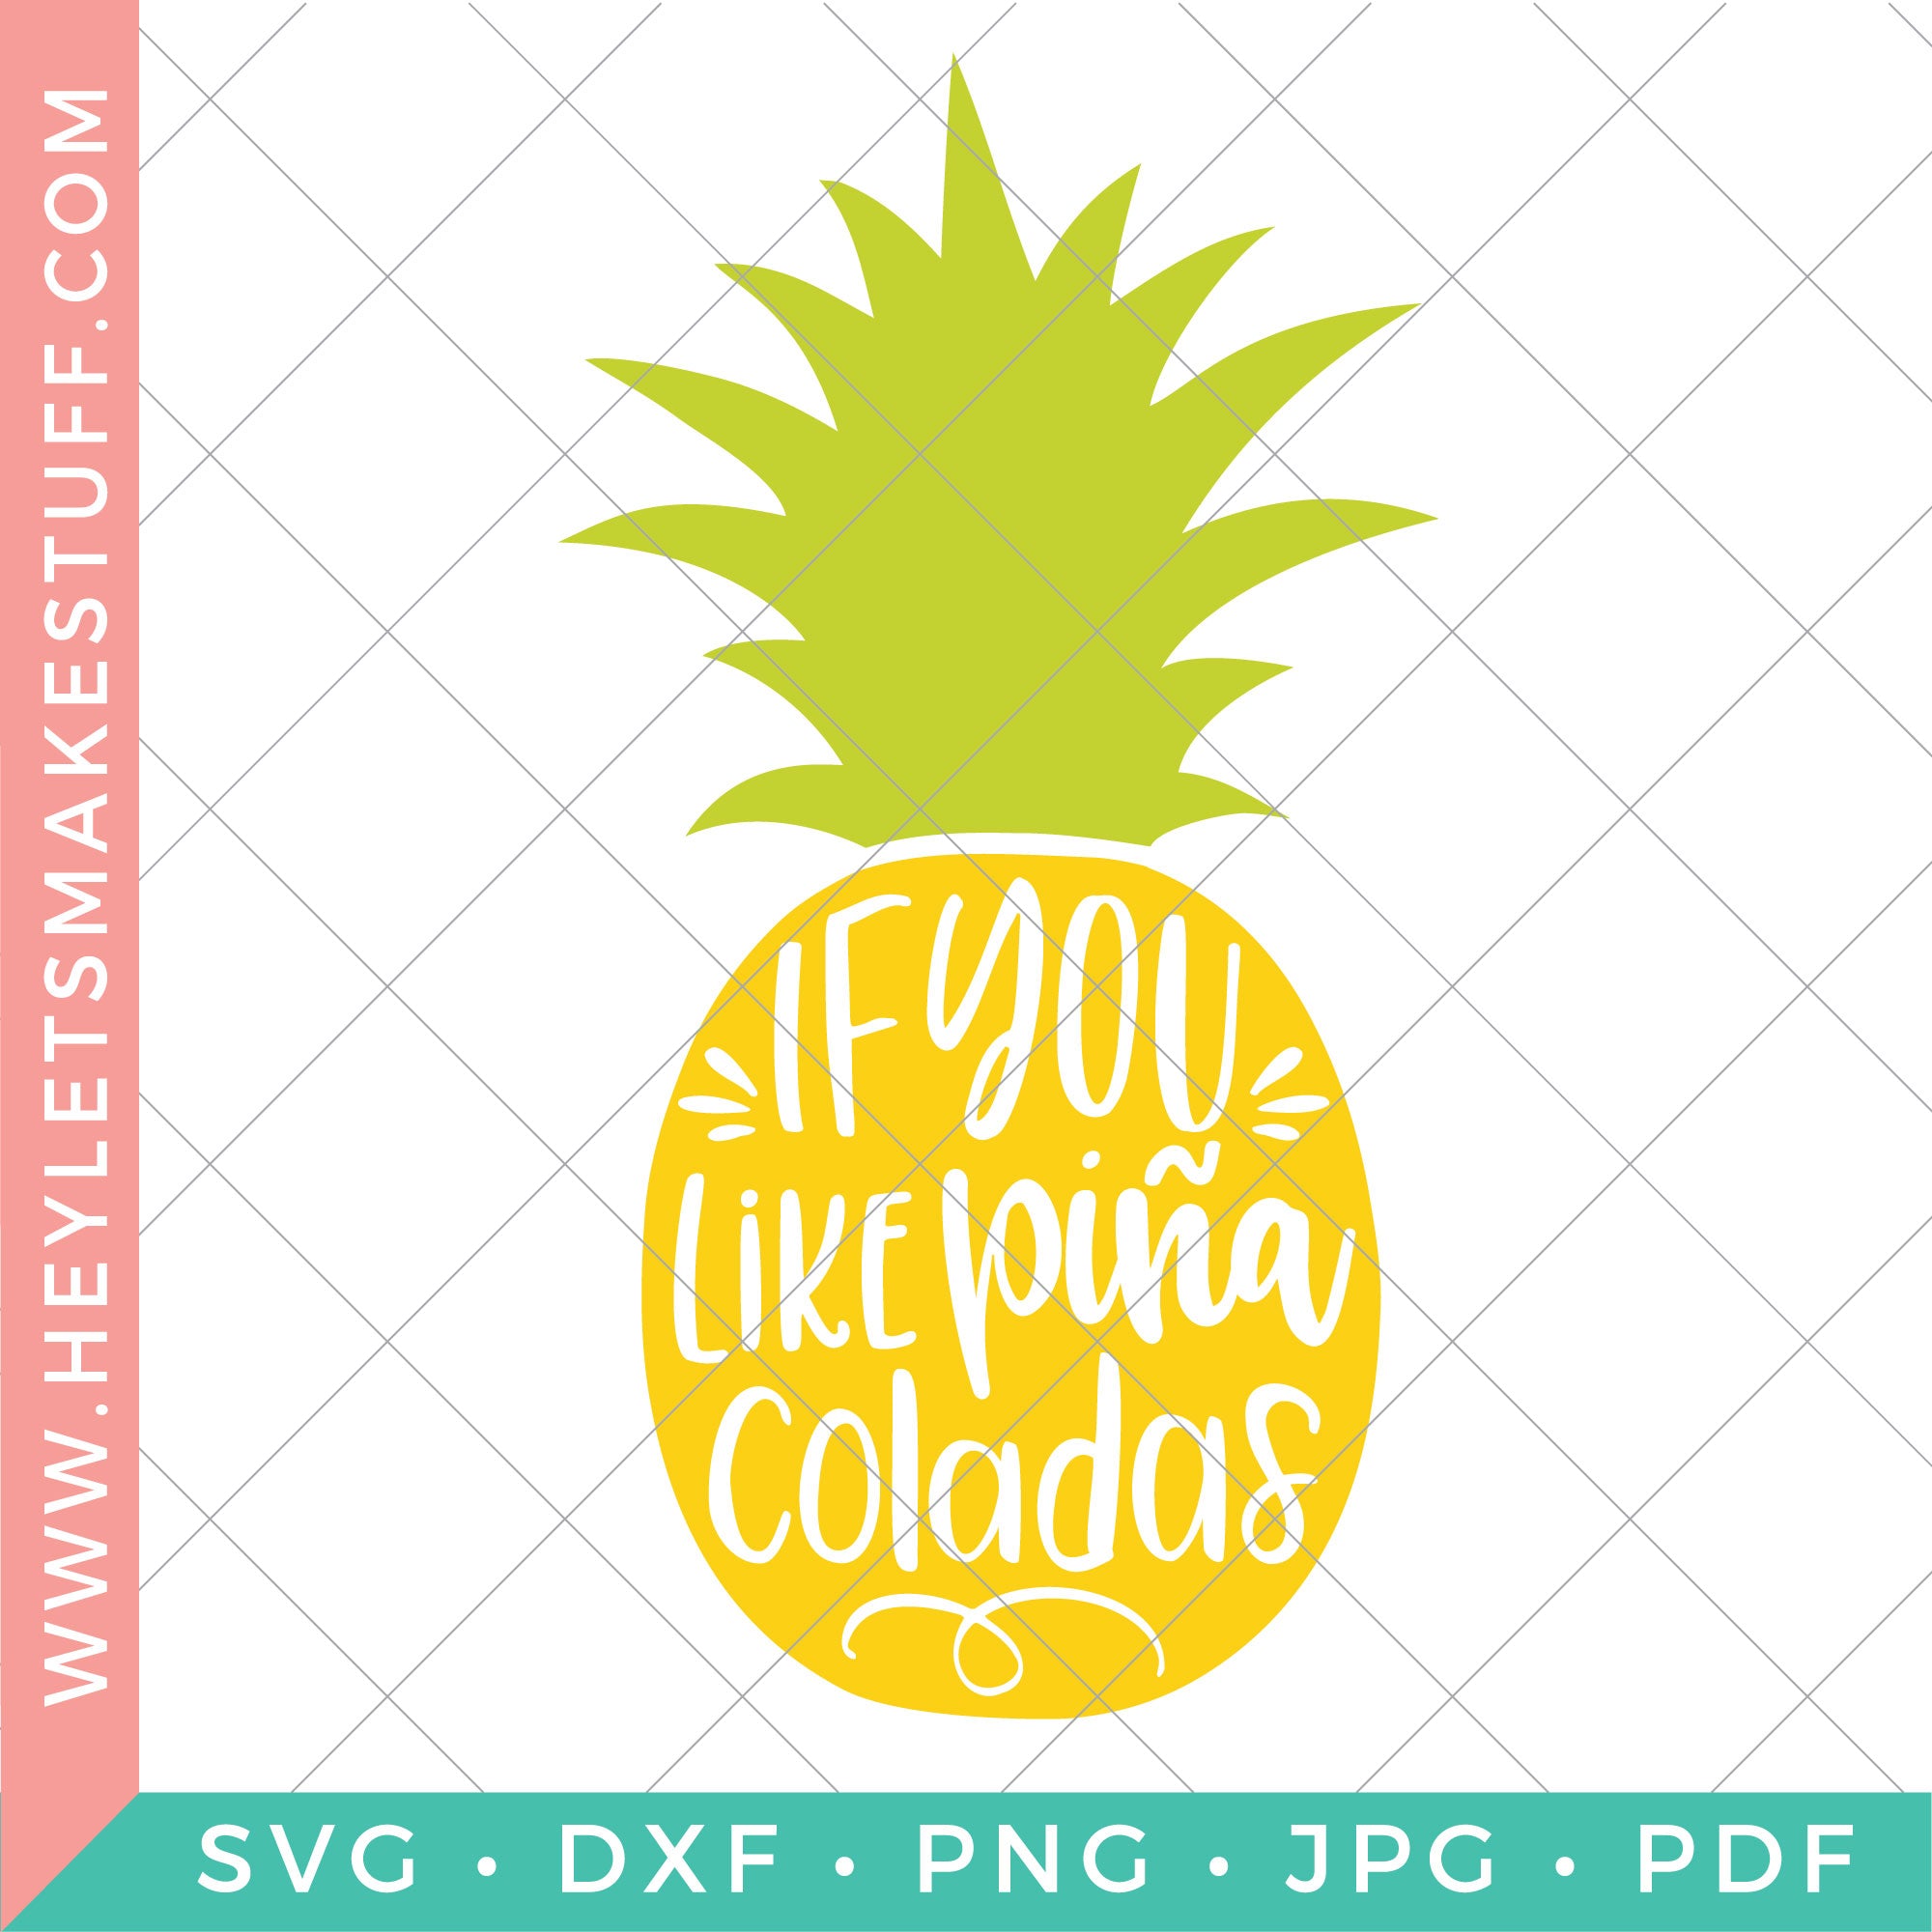 Download Pina Colada Pineapple Svg For Tropical Crafts And Summer Projects